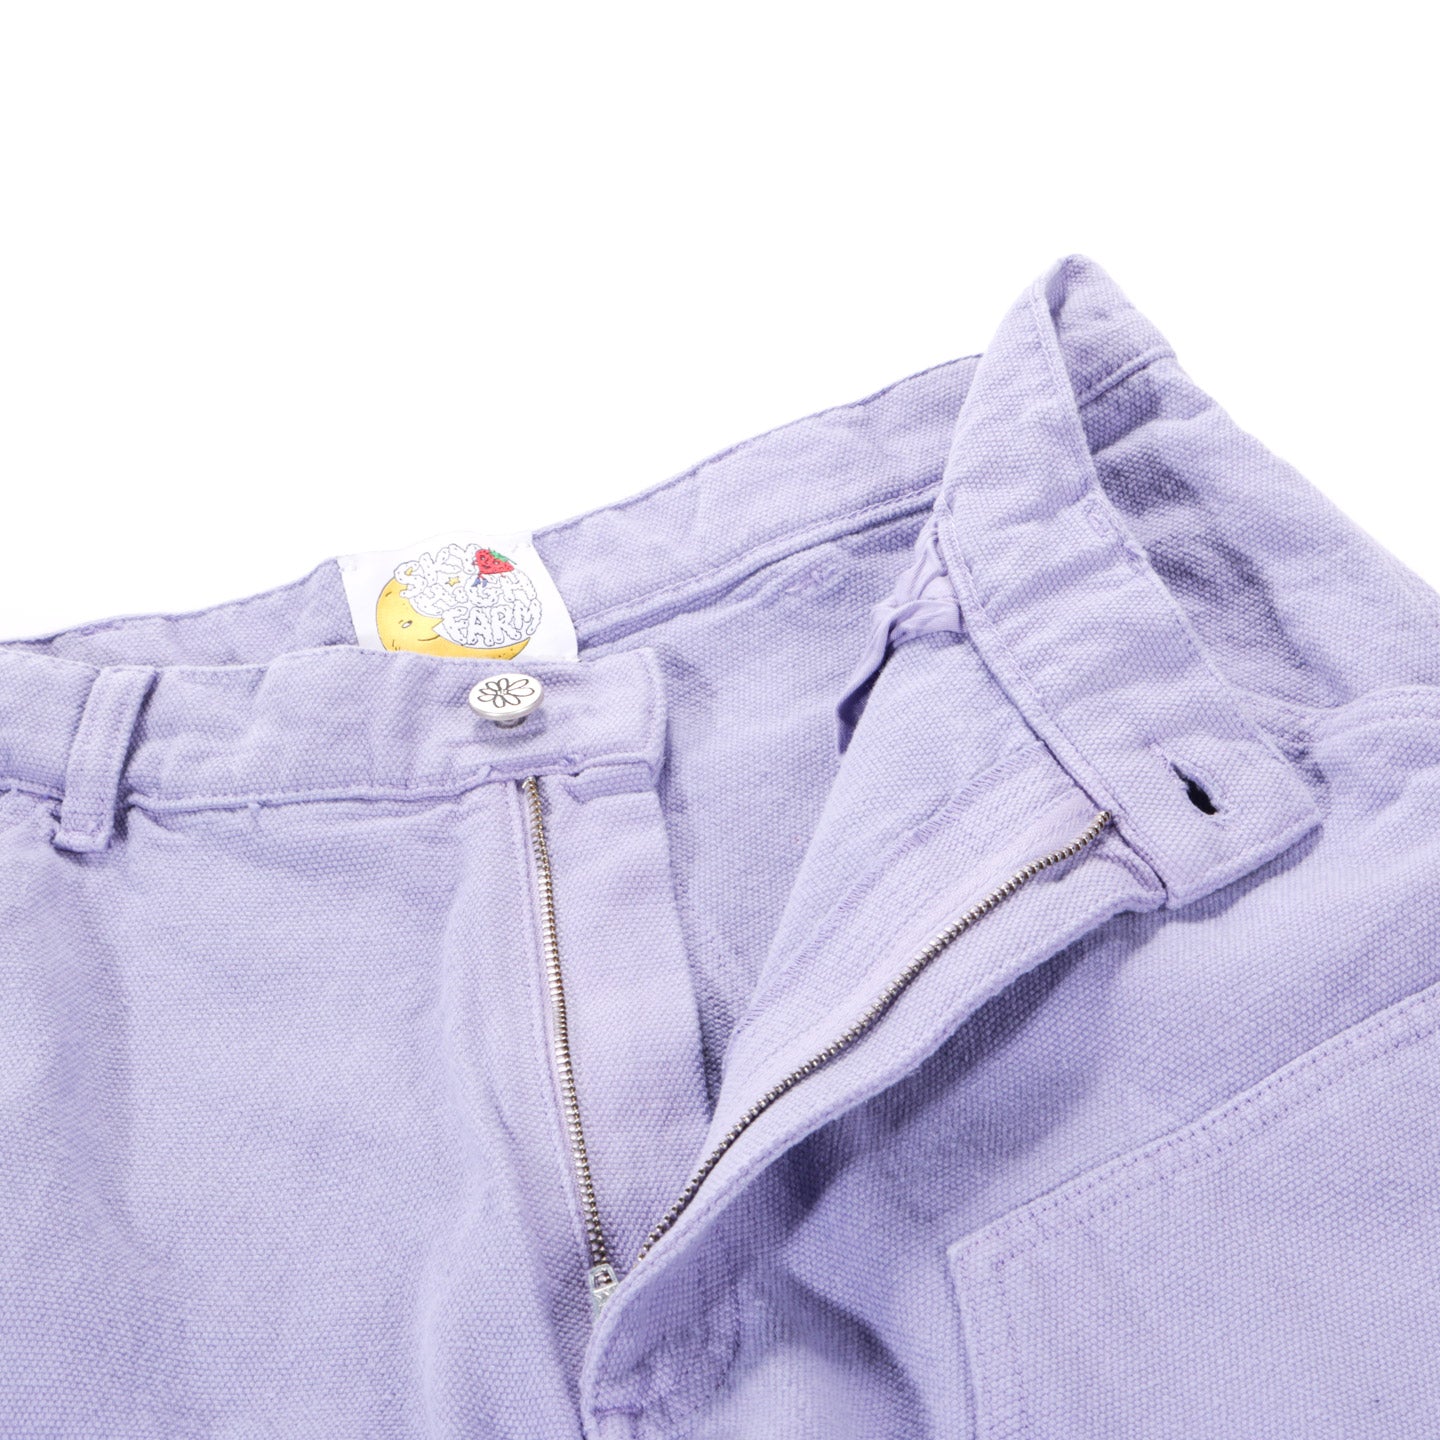 HIGH CLOTHING FARM PANTS SKY DOUBLE | KNEE LAVENDER WORKWEAR TODAY